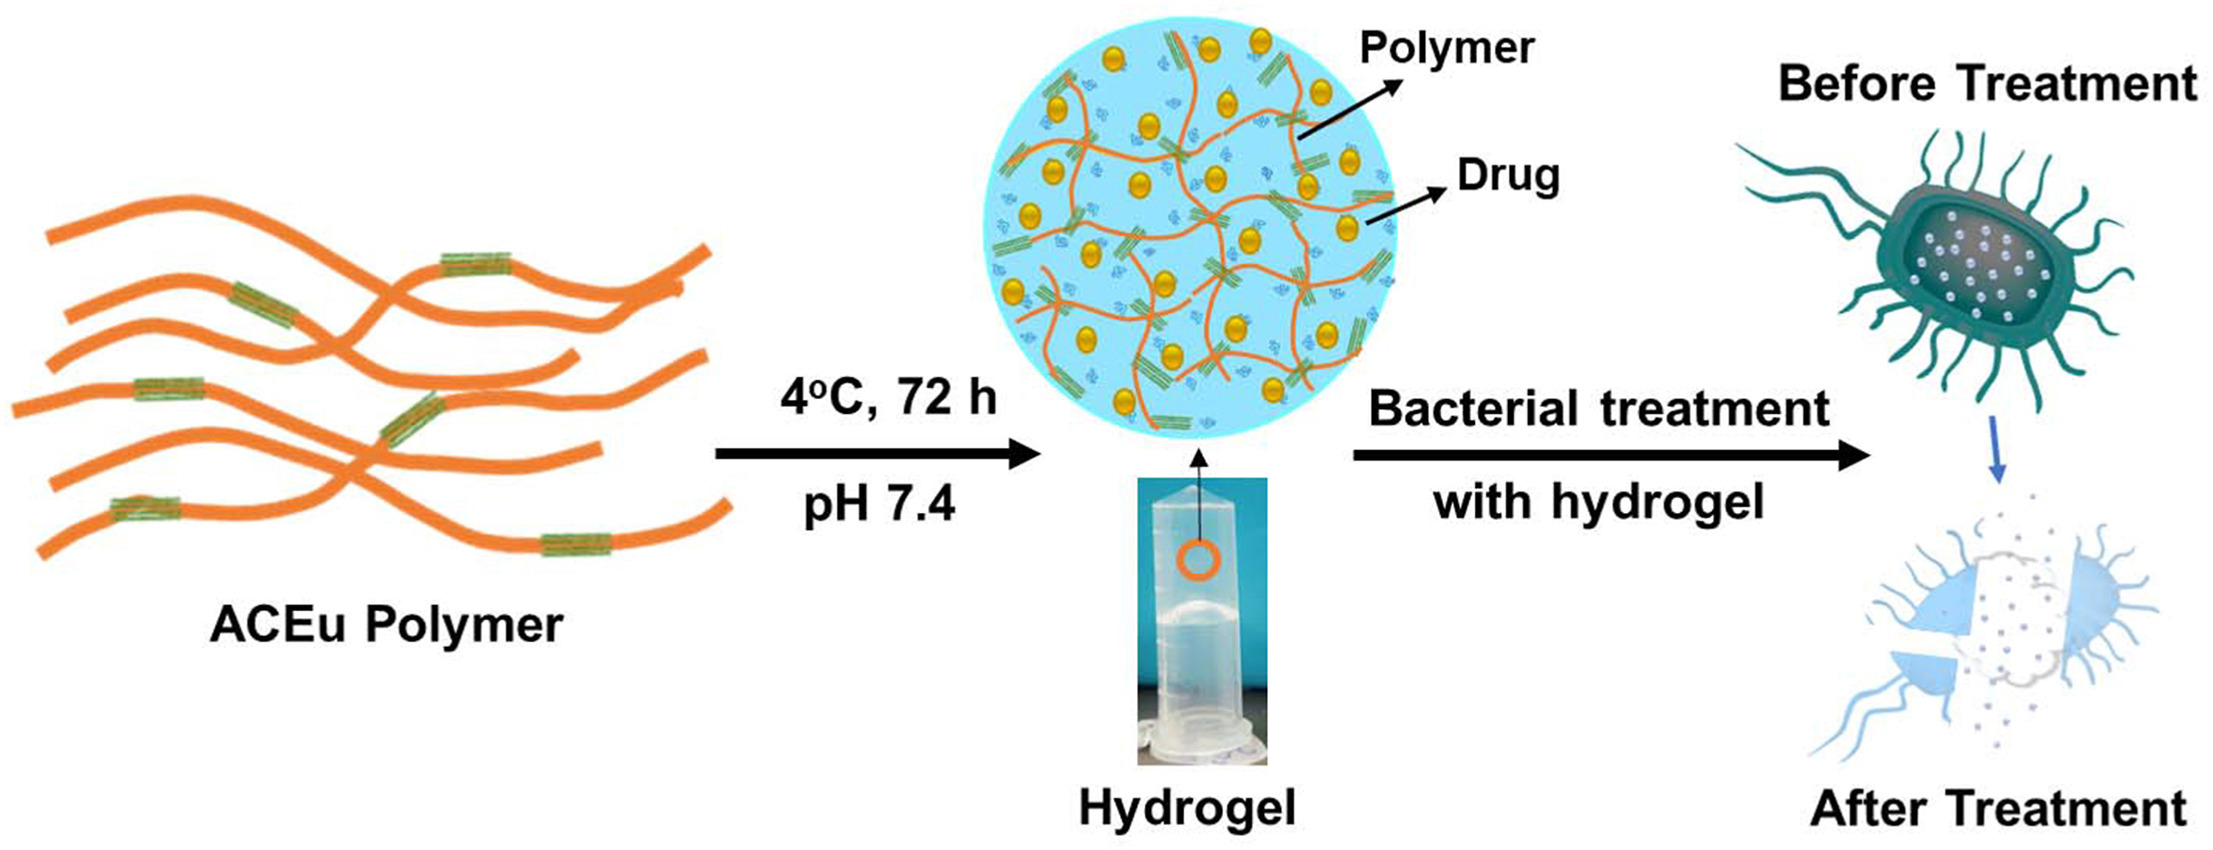 Development of a Eudragit-based hydrogel for the controlled release of hydrophobic and hydrophilic drugs for the treatment of wound infections